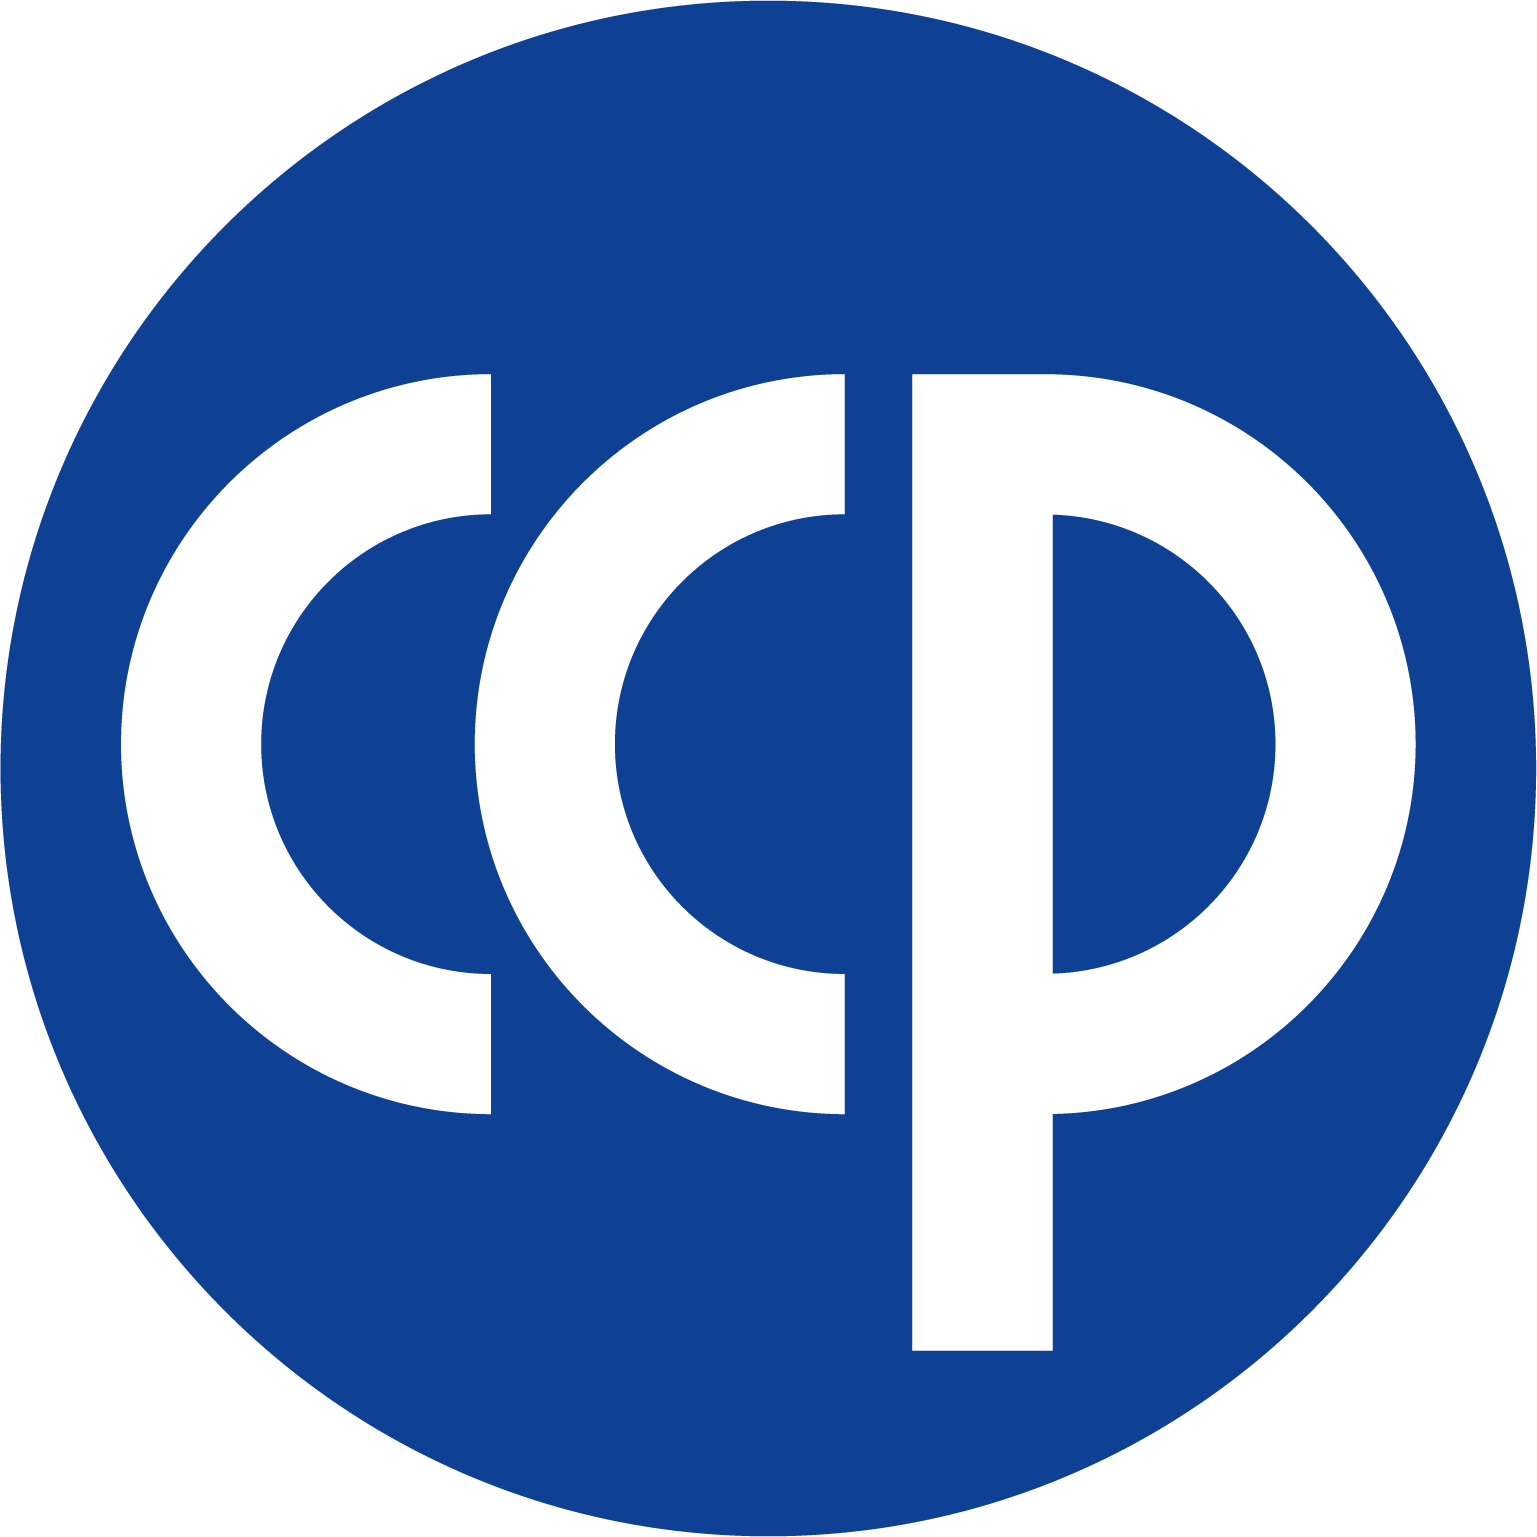 Centre for Competition Policy Logo